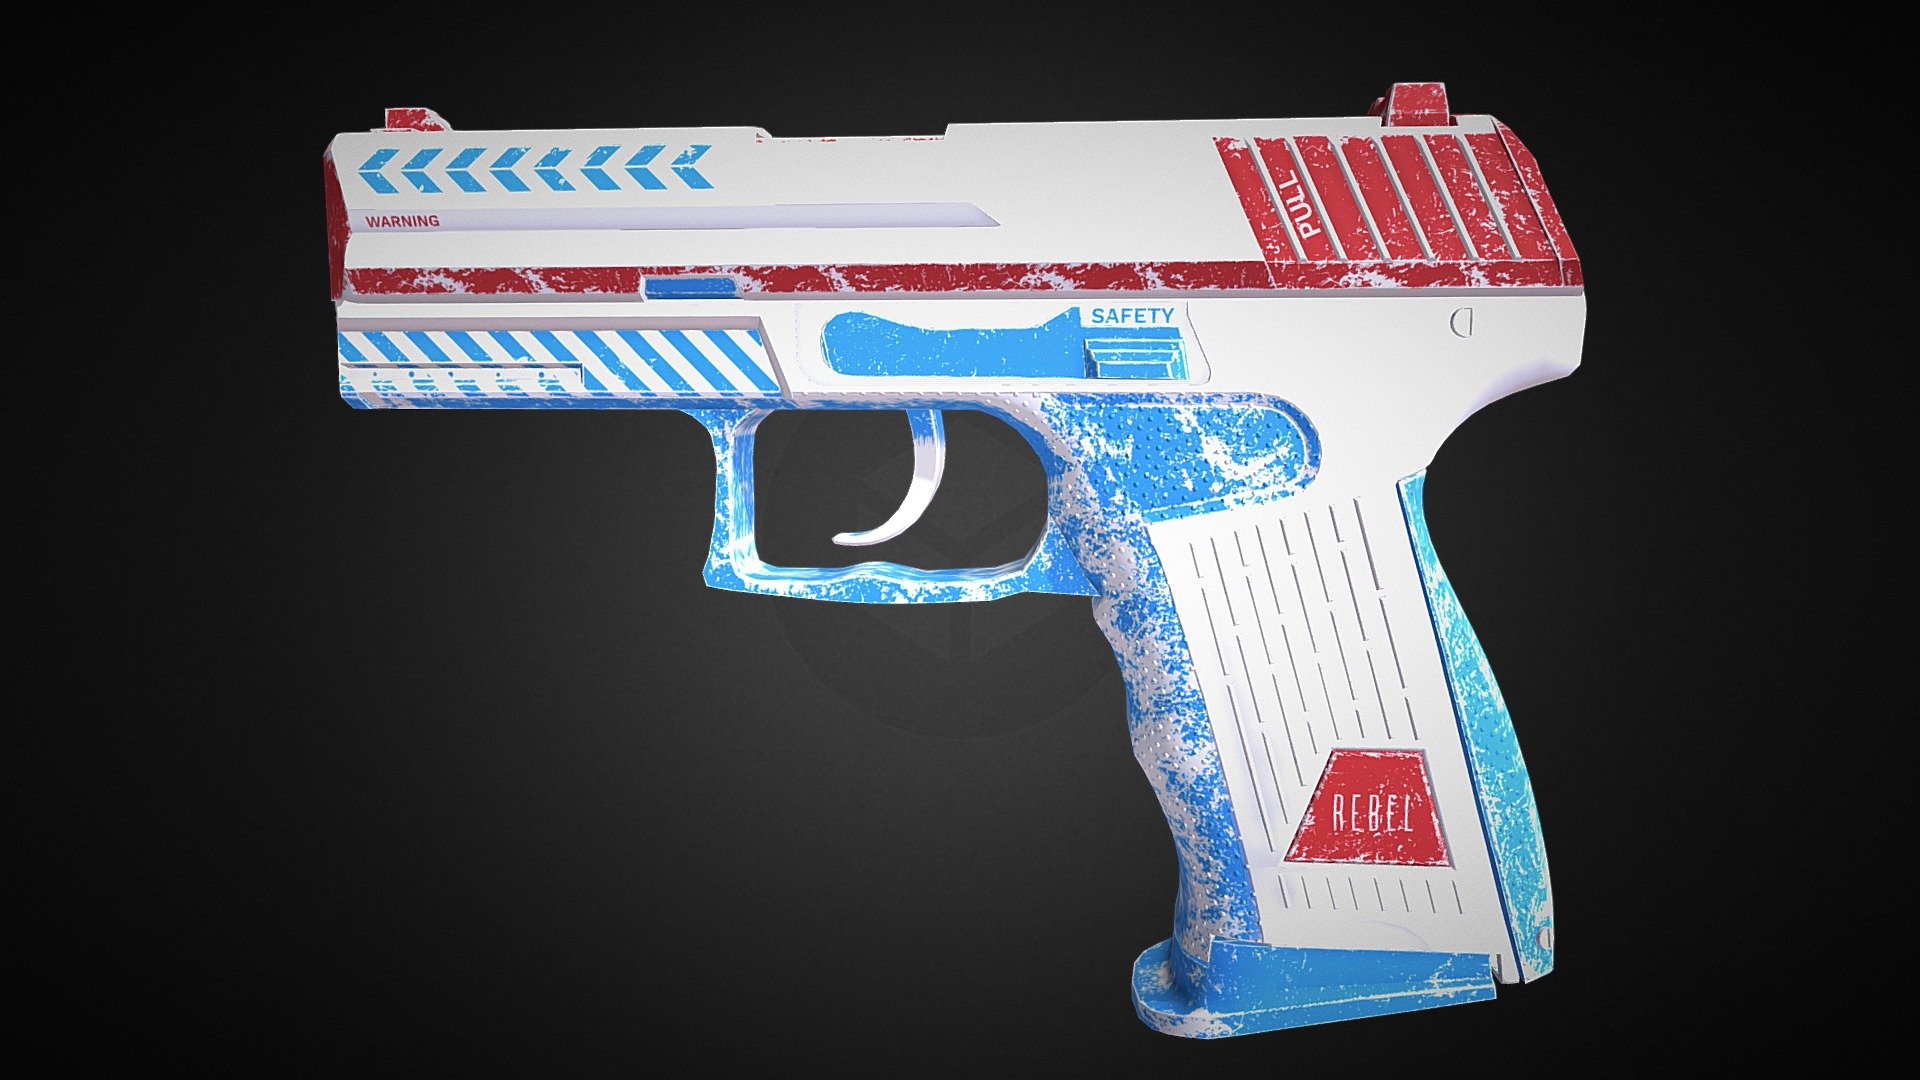 P2000 Oceanic cs go skin for android download